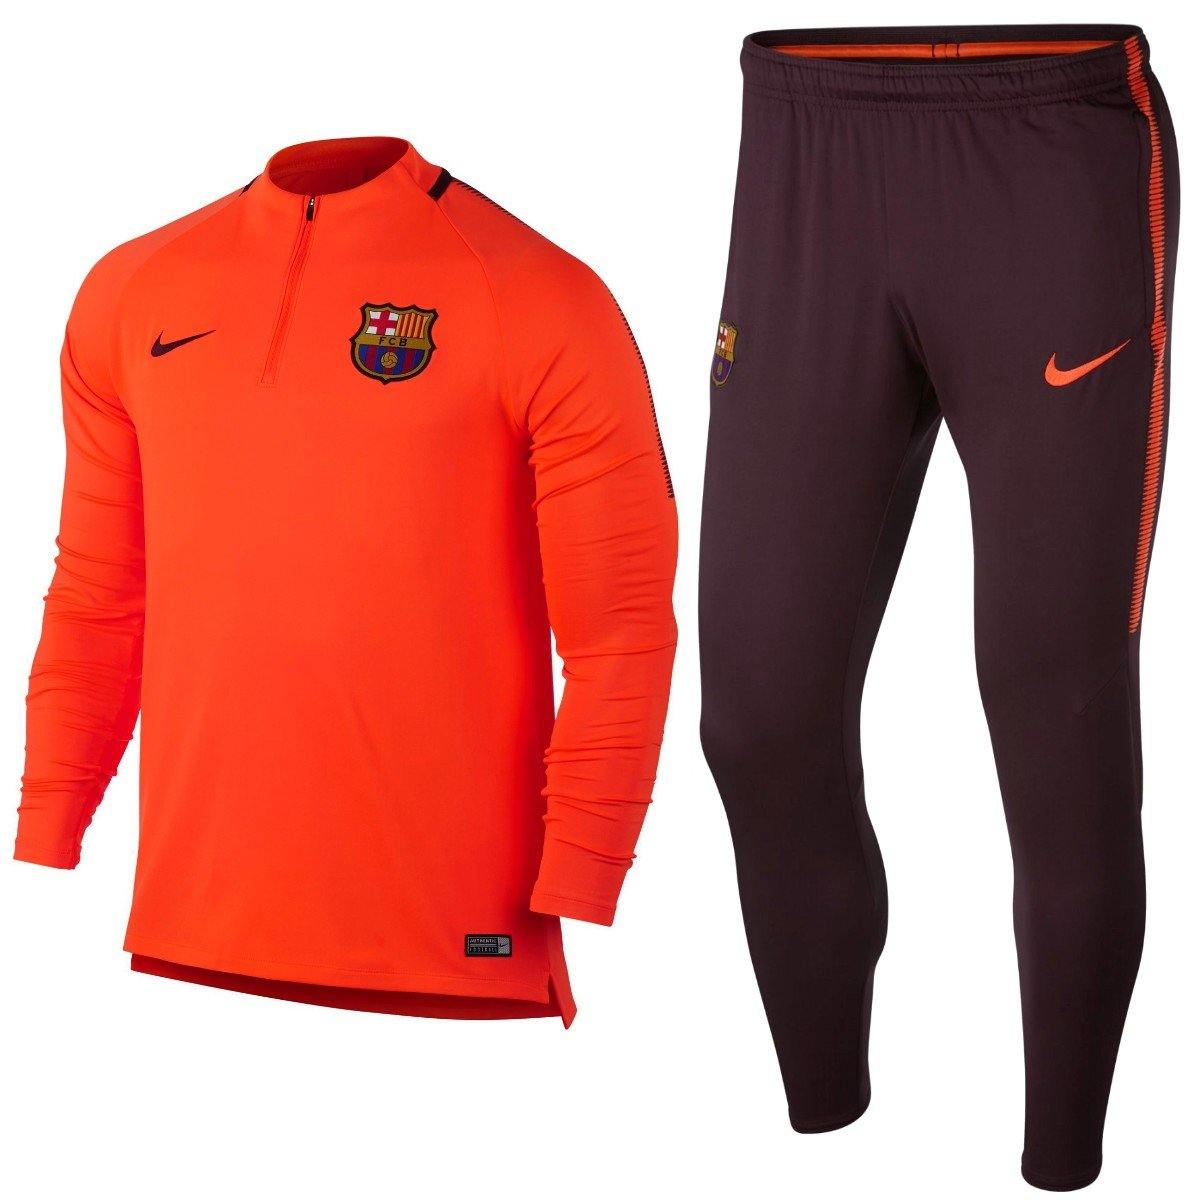 UCL training technical tracksuit 2017/18 - Nike SoccerTracksuits.com